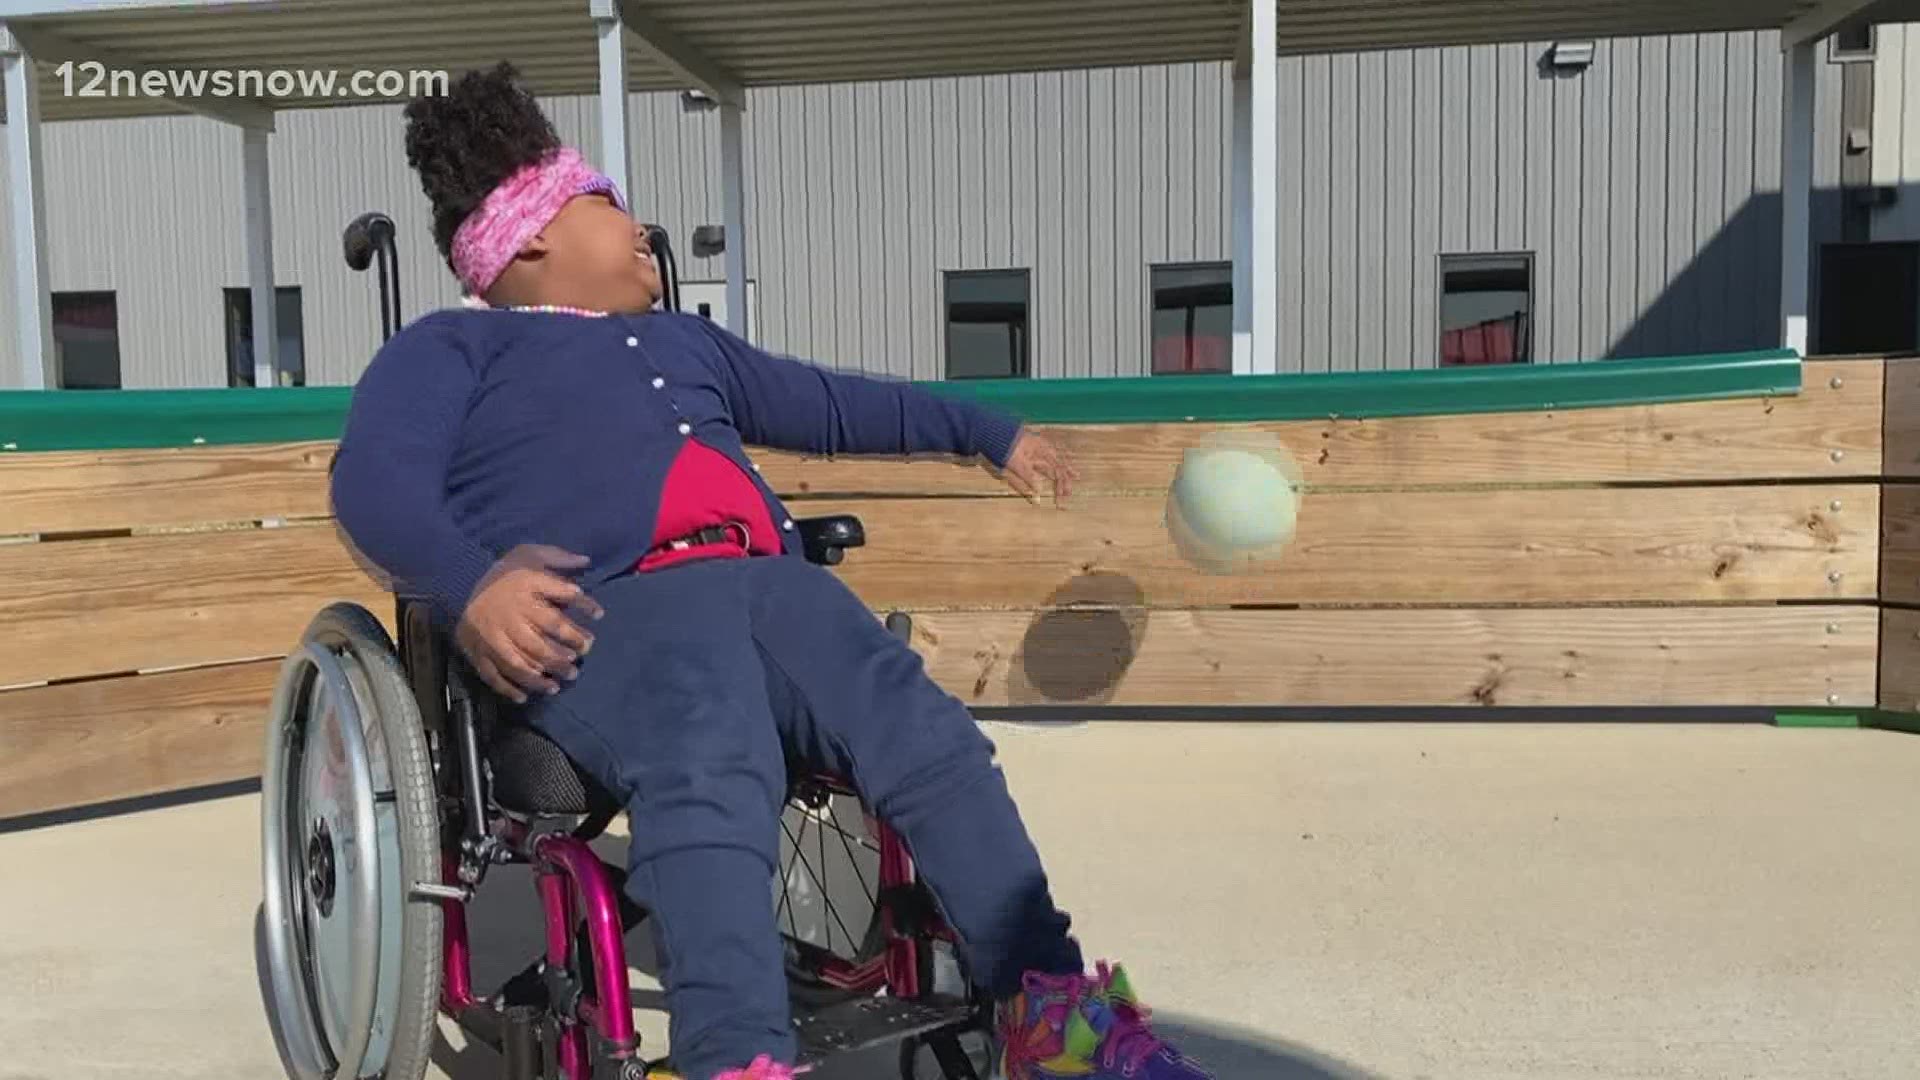 Melissa Johnson is trying to raise money for a new ride for her daughter with cerebral palsy, and she needs a van that will accommodate their needs.